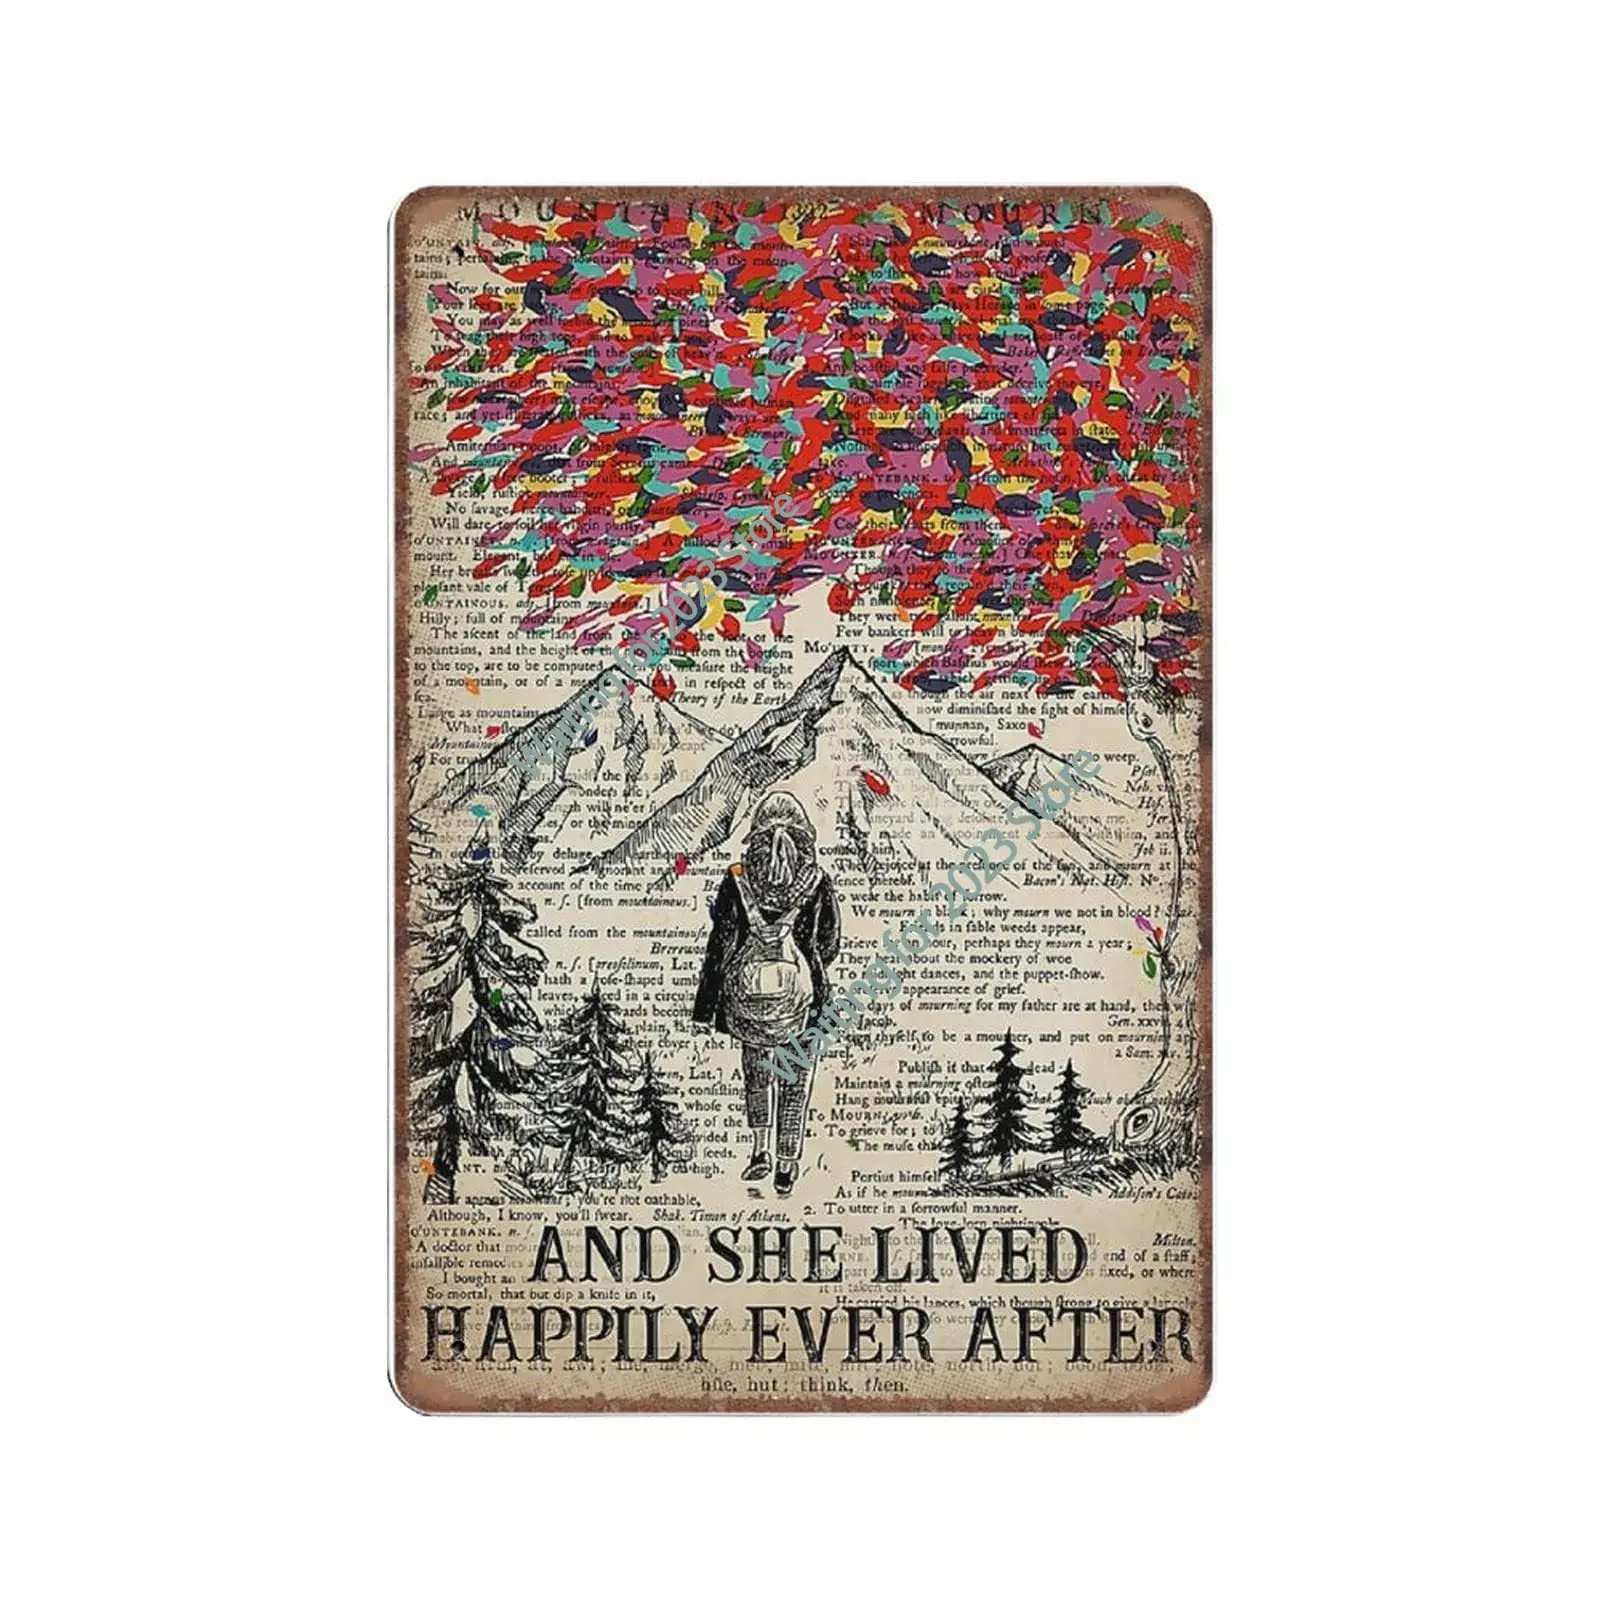 

Metal Vintage Tin Sign Decor Cute Hiking and She Lived Happily Ever After Signs Poster Girl Pub Club Cafe bar Home Wall Art